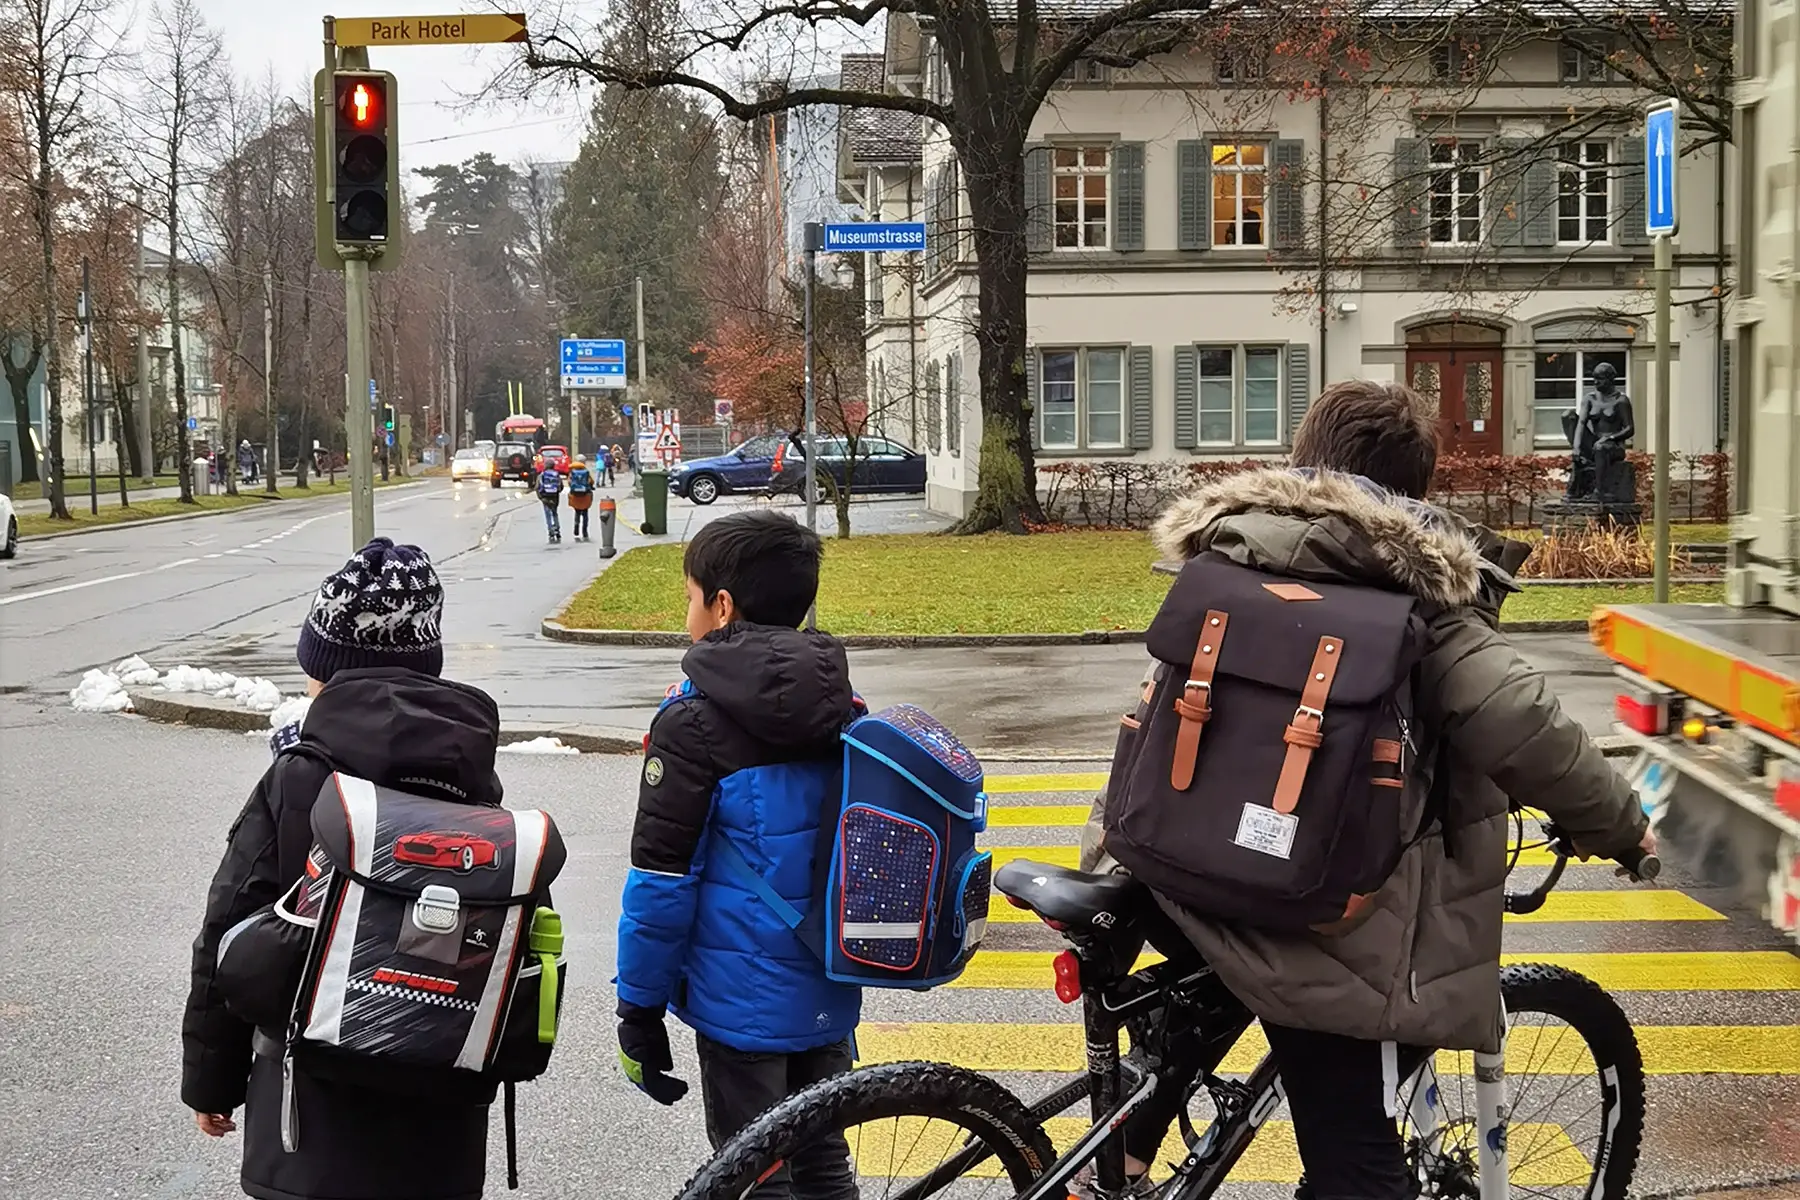 A group of children heading to school in Winterthur